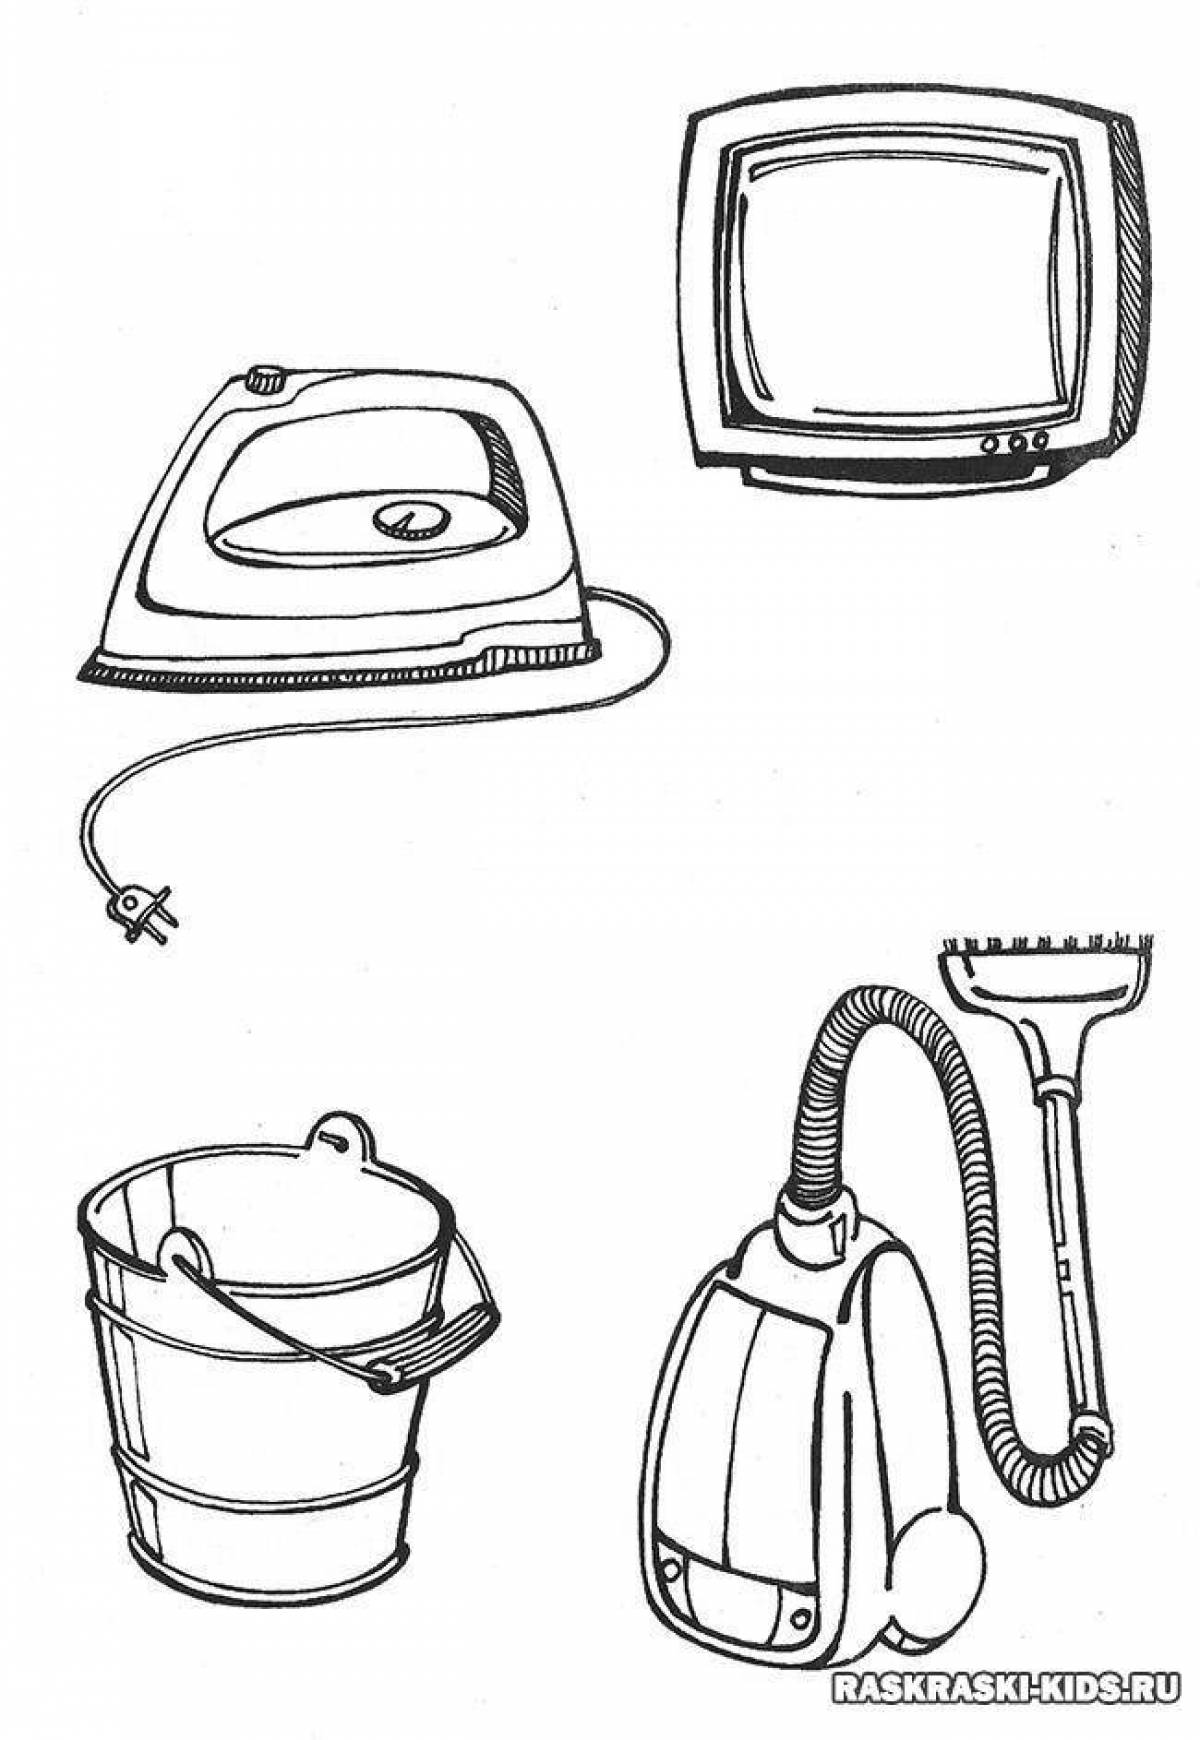 Coloring page tempting home appliances